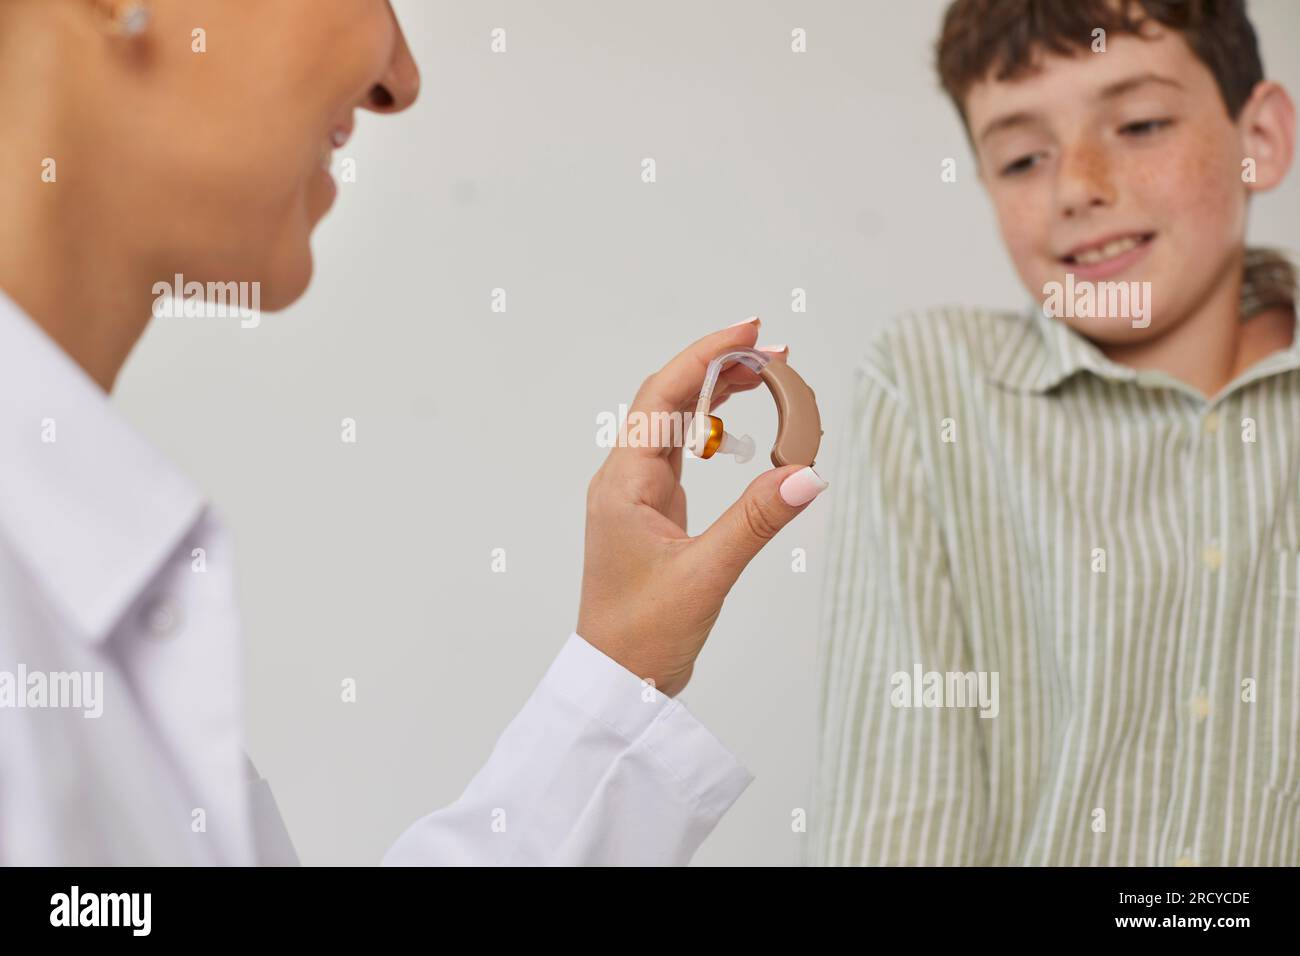 Modern effective hearing aid in hands of female ENT doctor showing it to smiling preteen boy. Stock Photo